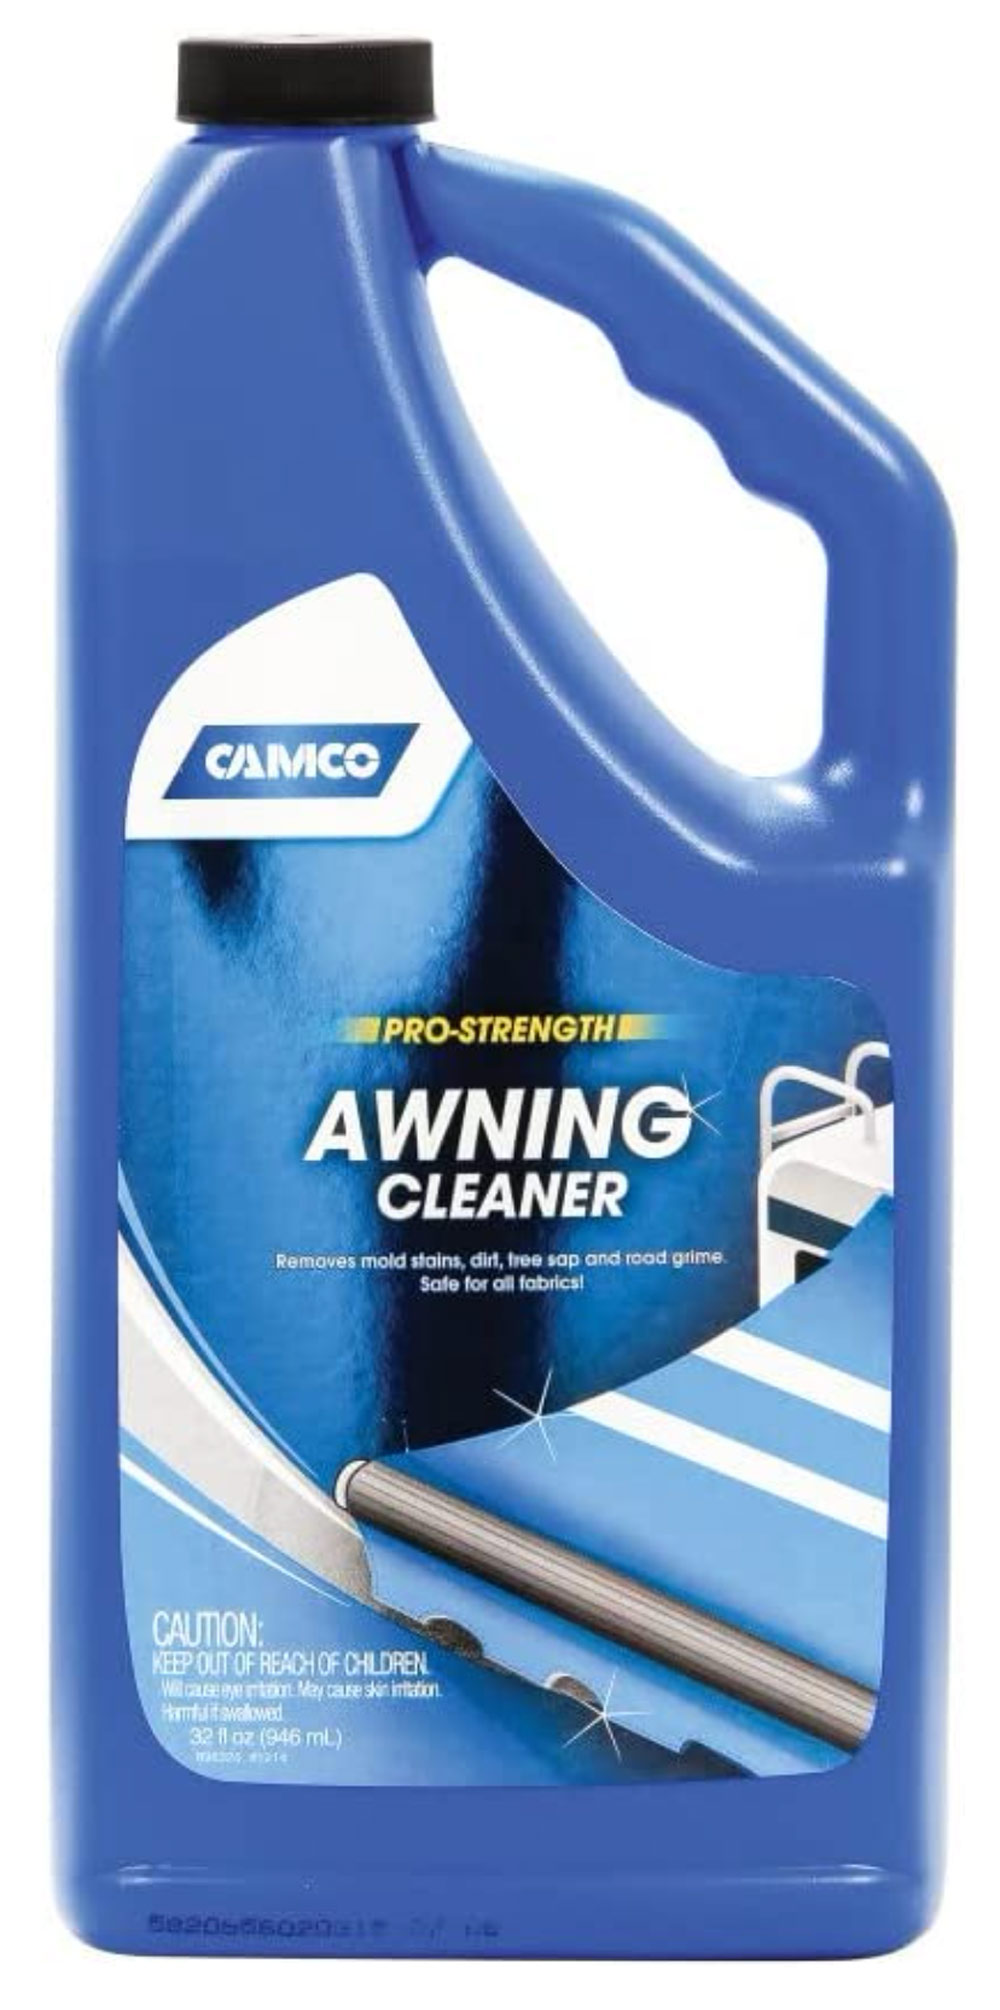 close view of a blue container of Camco’s Pro-Strength Awning cleaner